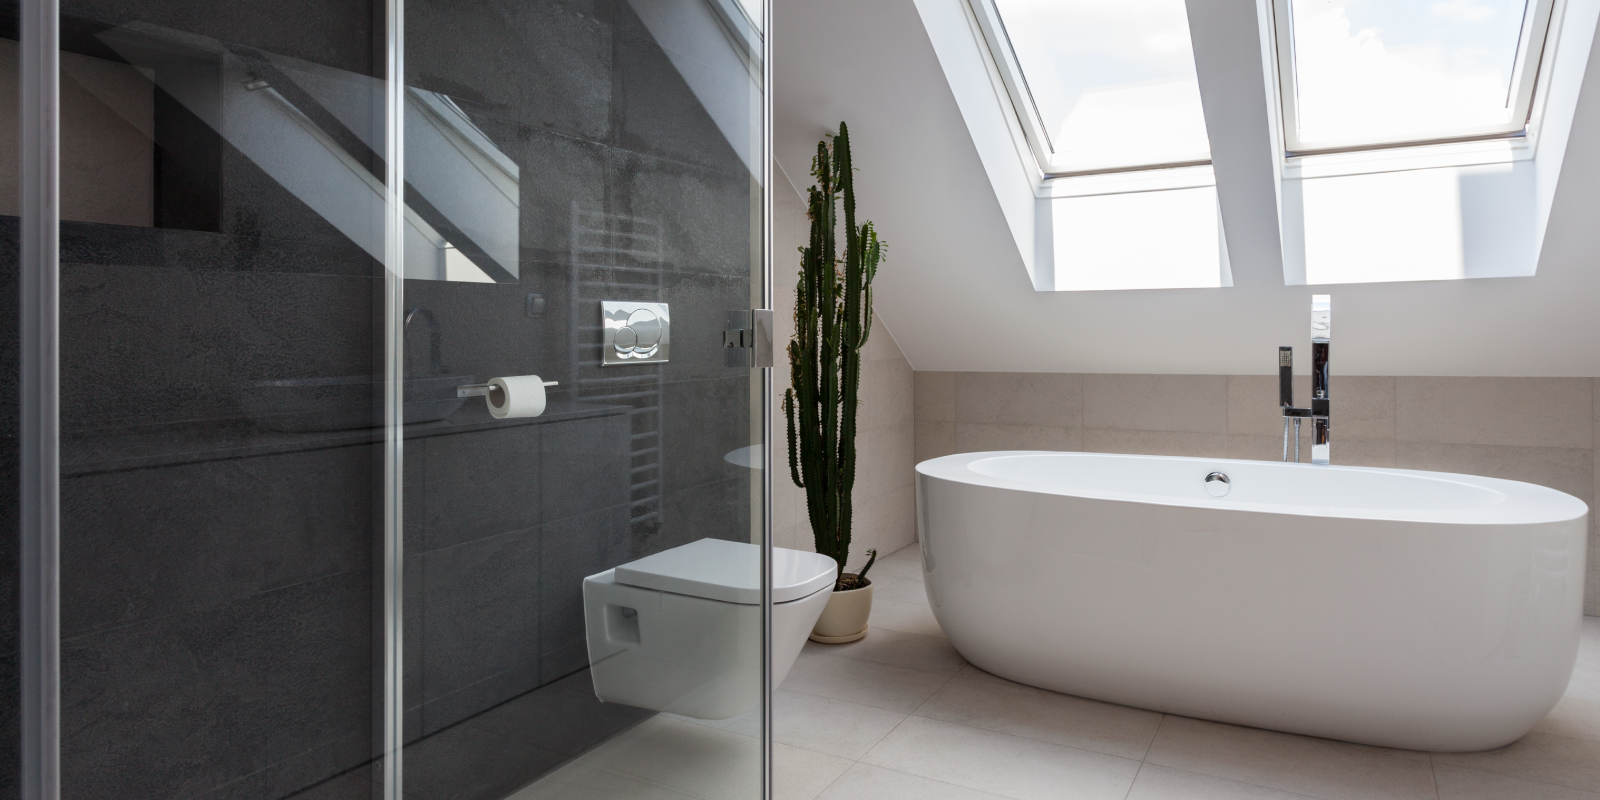 Porcelain tile bathroom. Why you should use porcelain tile from Trinity Surfaces